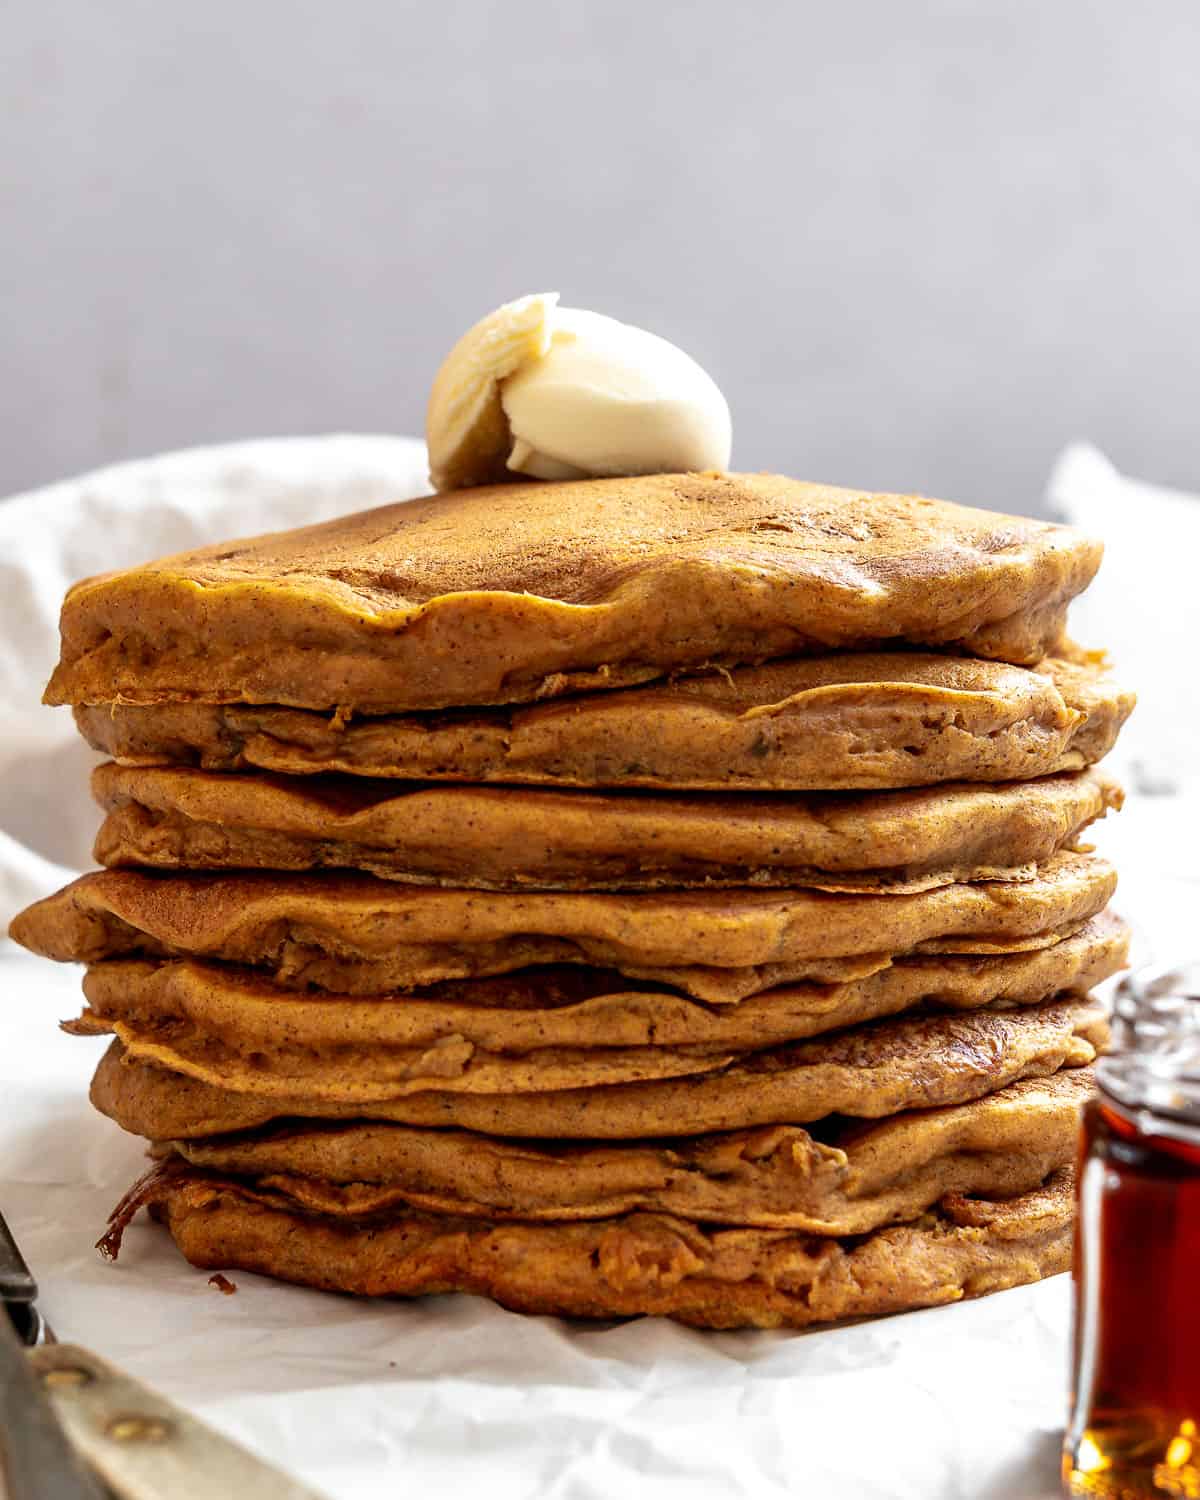 completed stack of Easy Sweet Potato Pancakes (Vegan) a،nst a light surface